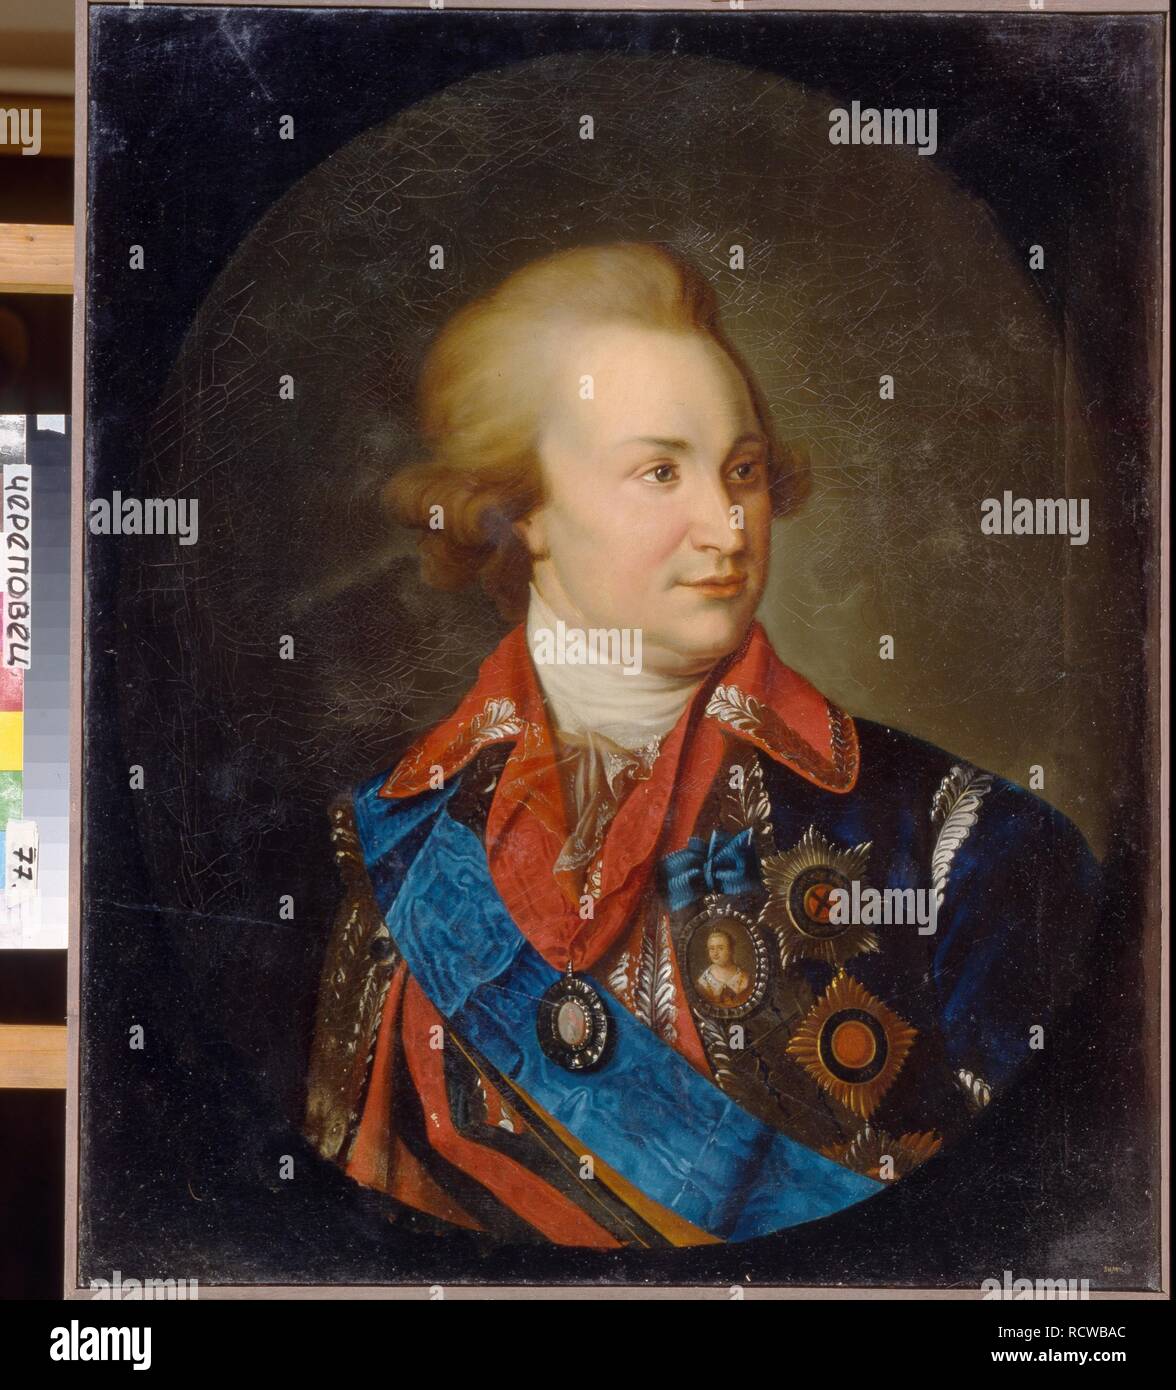 Portrait of Prince of Tauris general-field marshal, statesman Grigori A. Potyomkin (1739-1791). Museum: Museum of History and Art, Cherepovets. Author: ANONYMOUS. Stock Photo